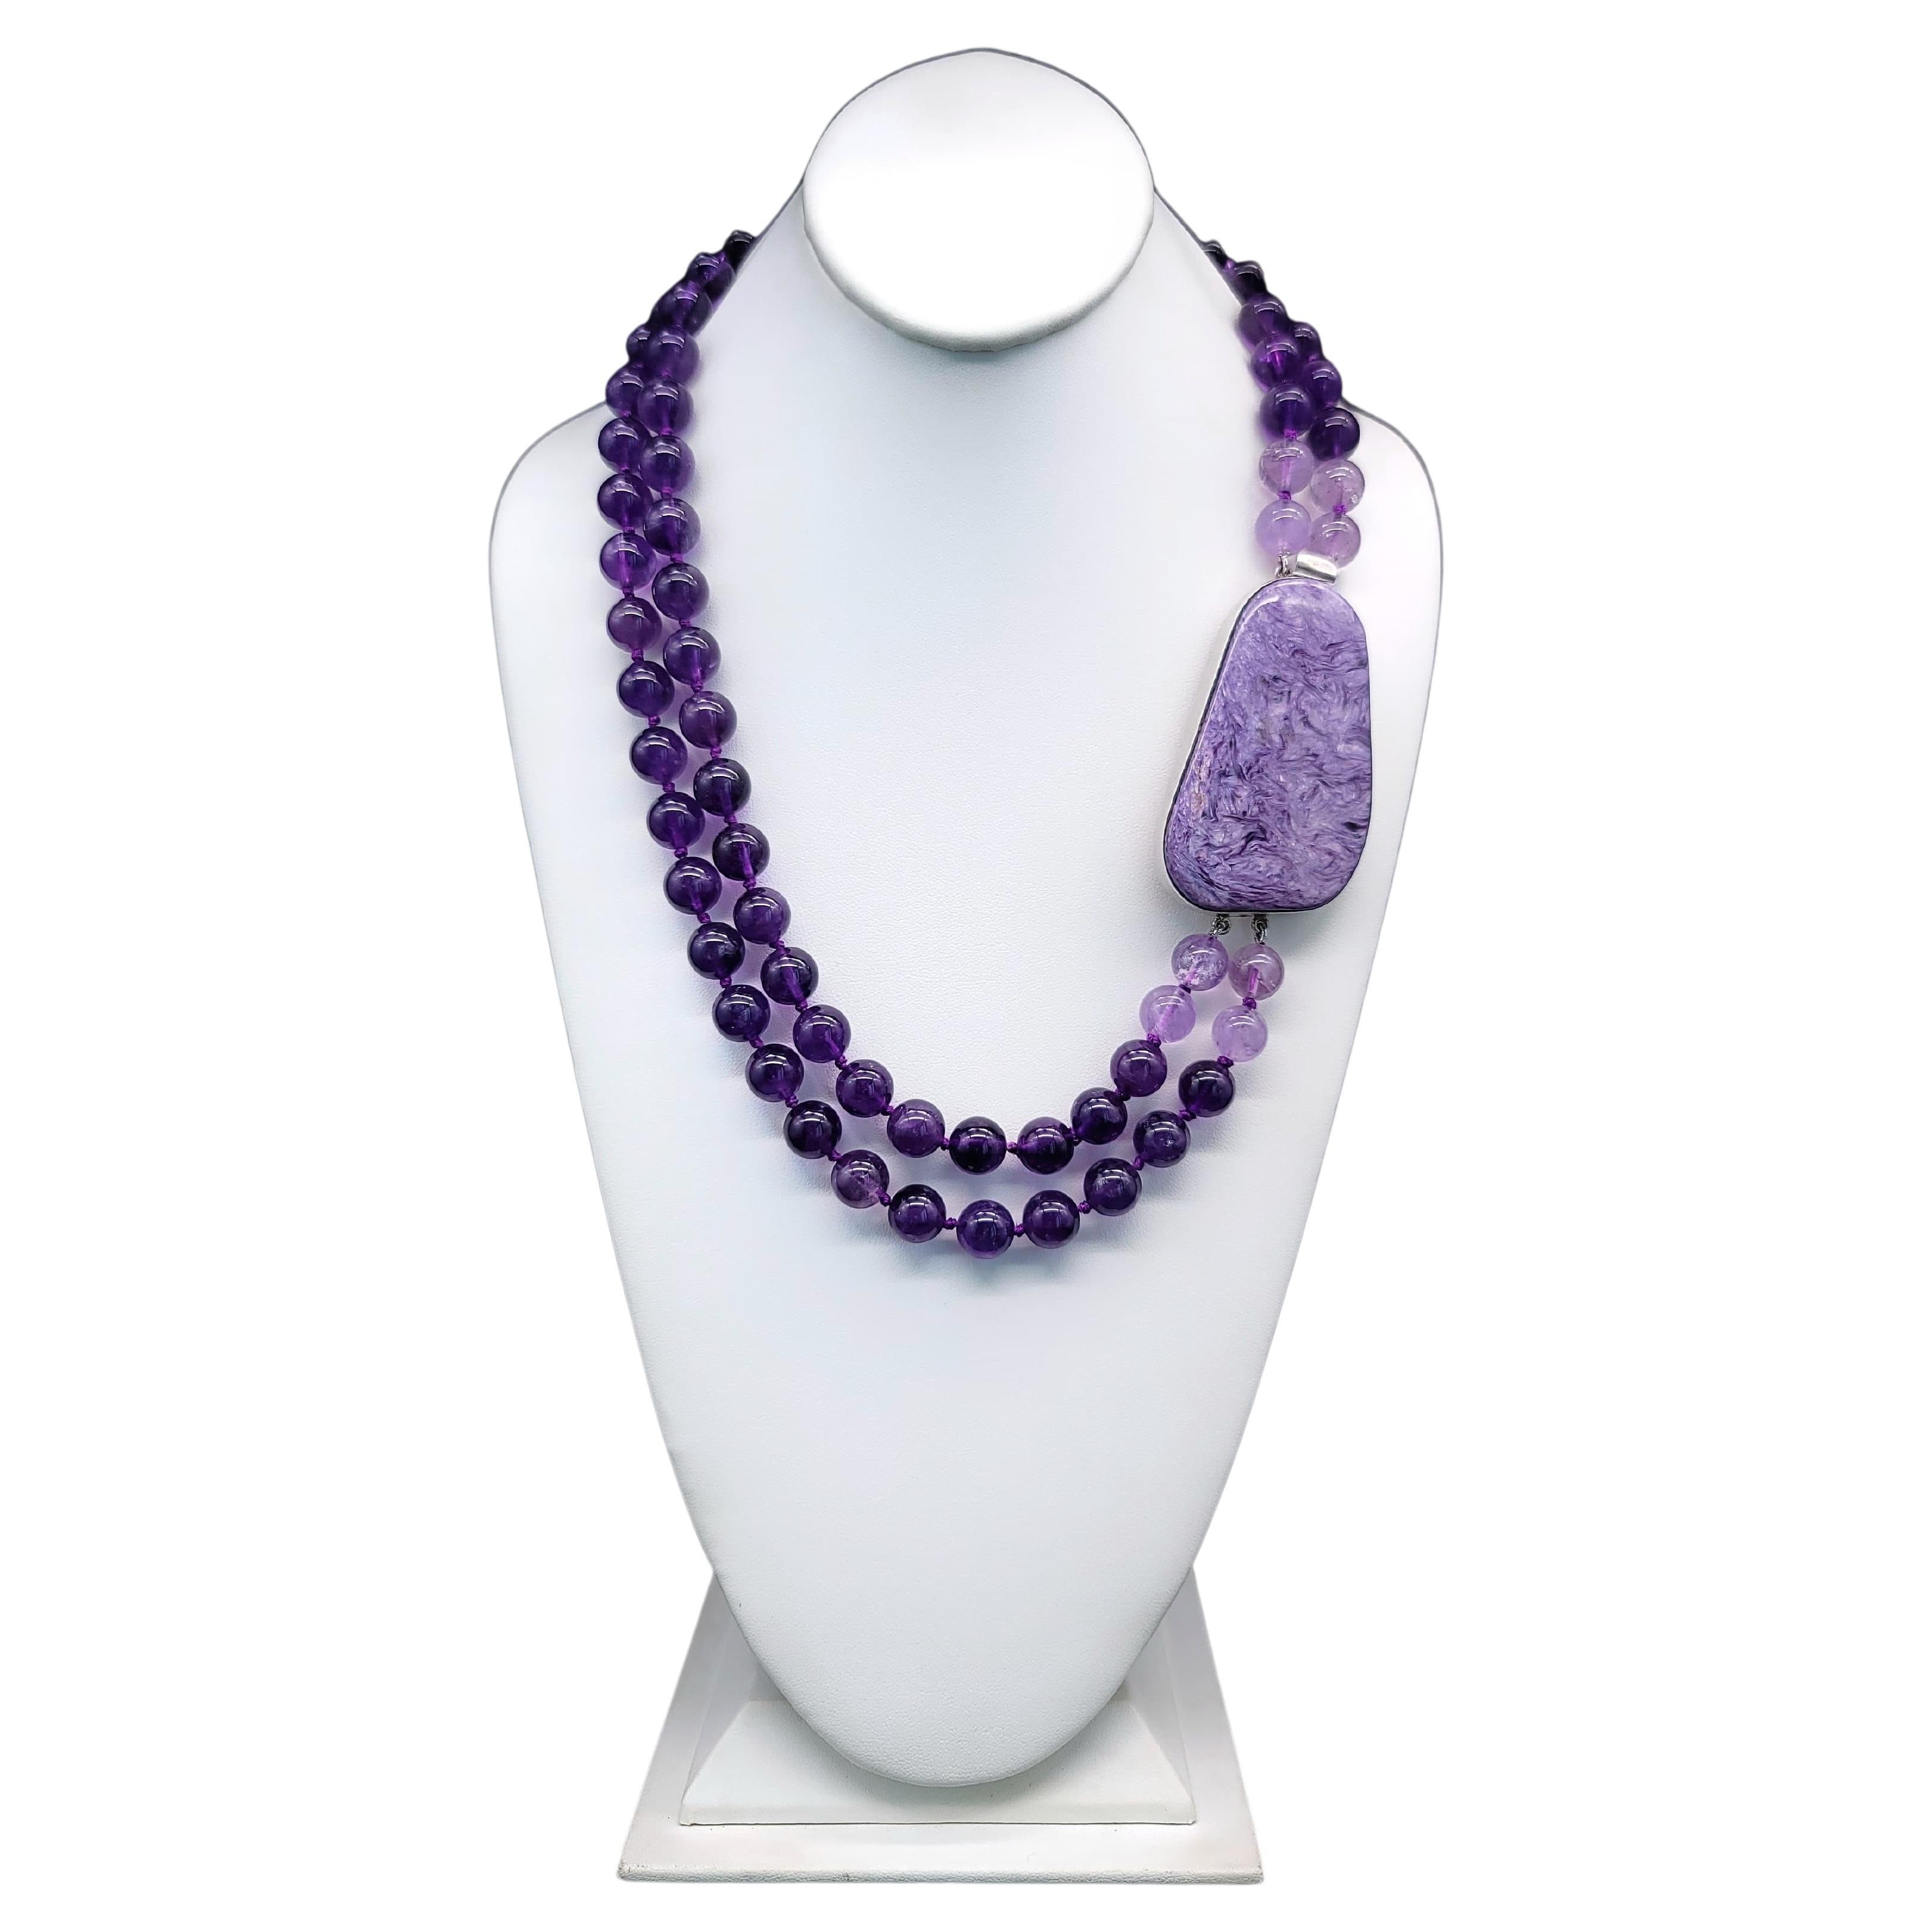 A.Jeschel 2 Strand Amethyst Necklace with a Spectacular Charoite Clasp. For Sale